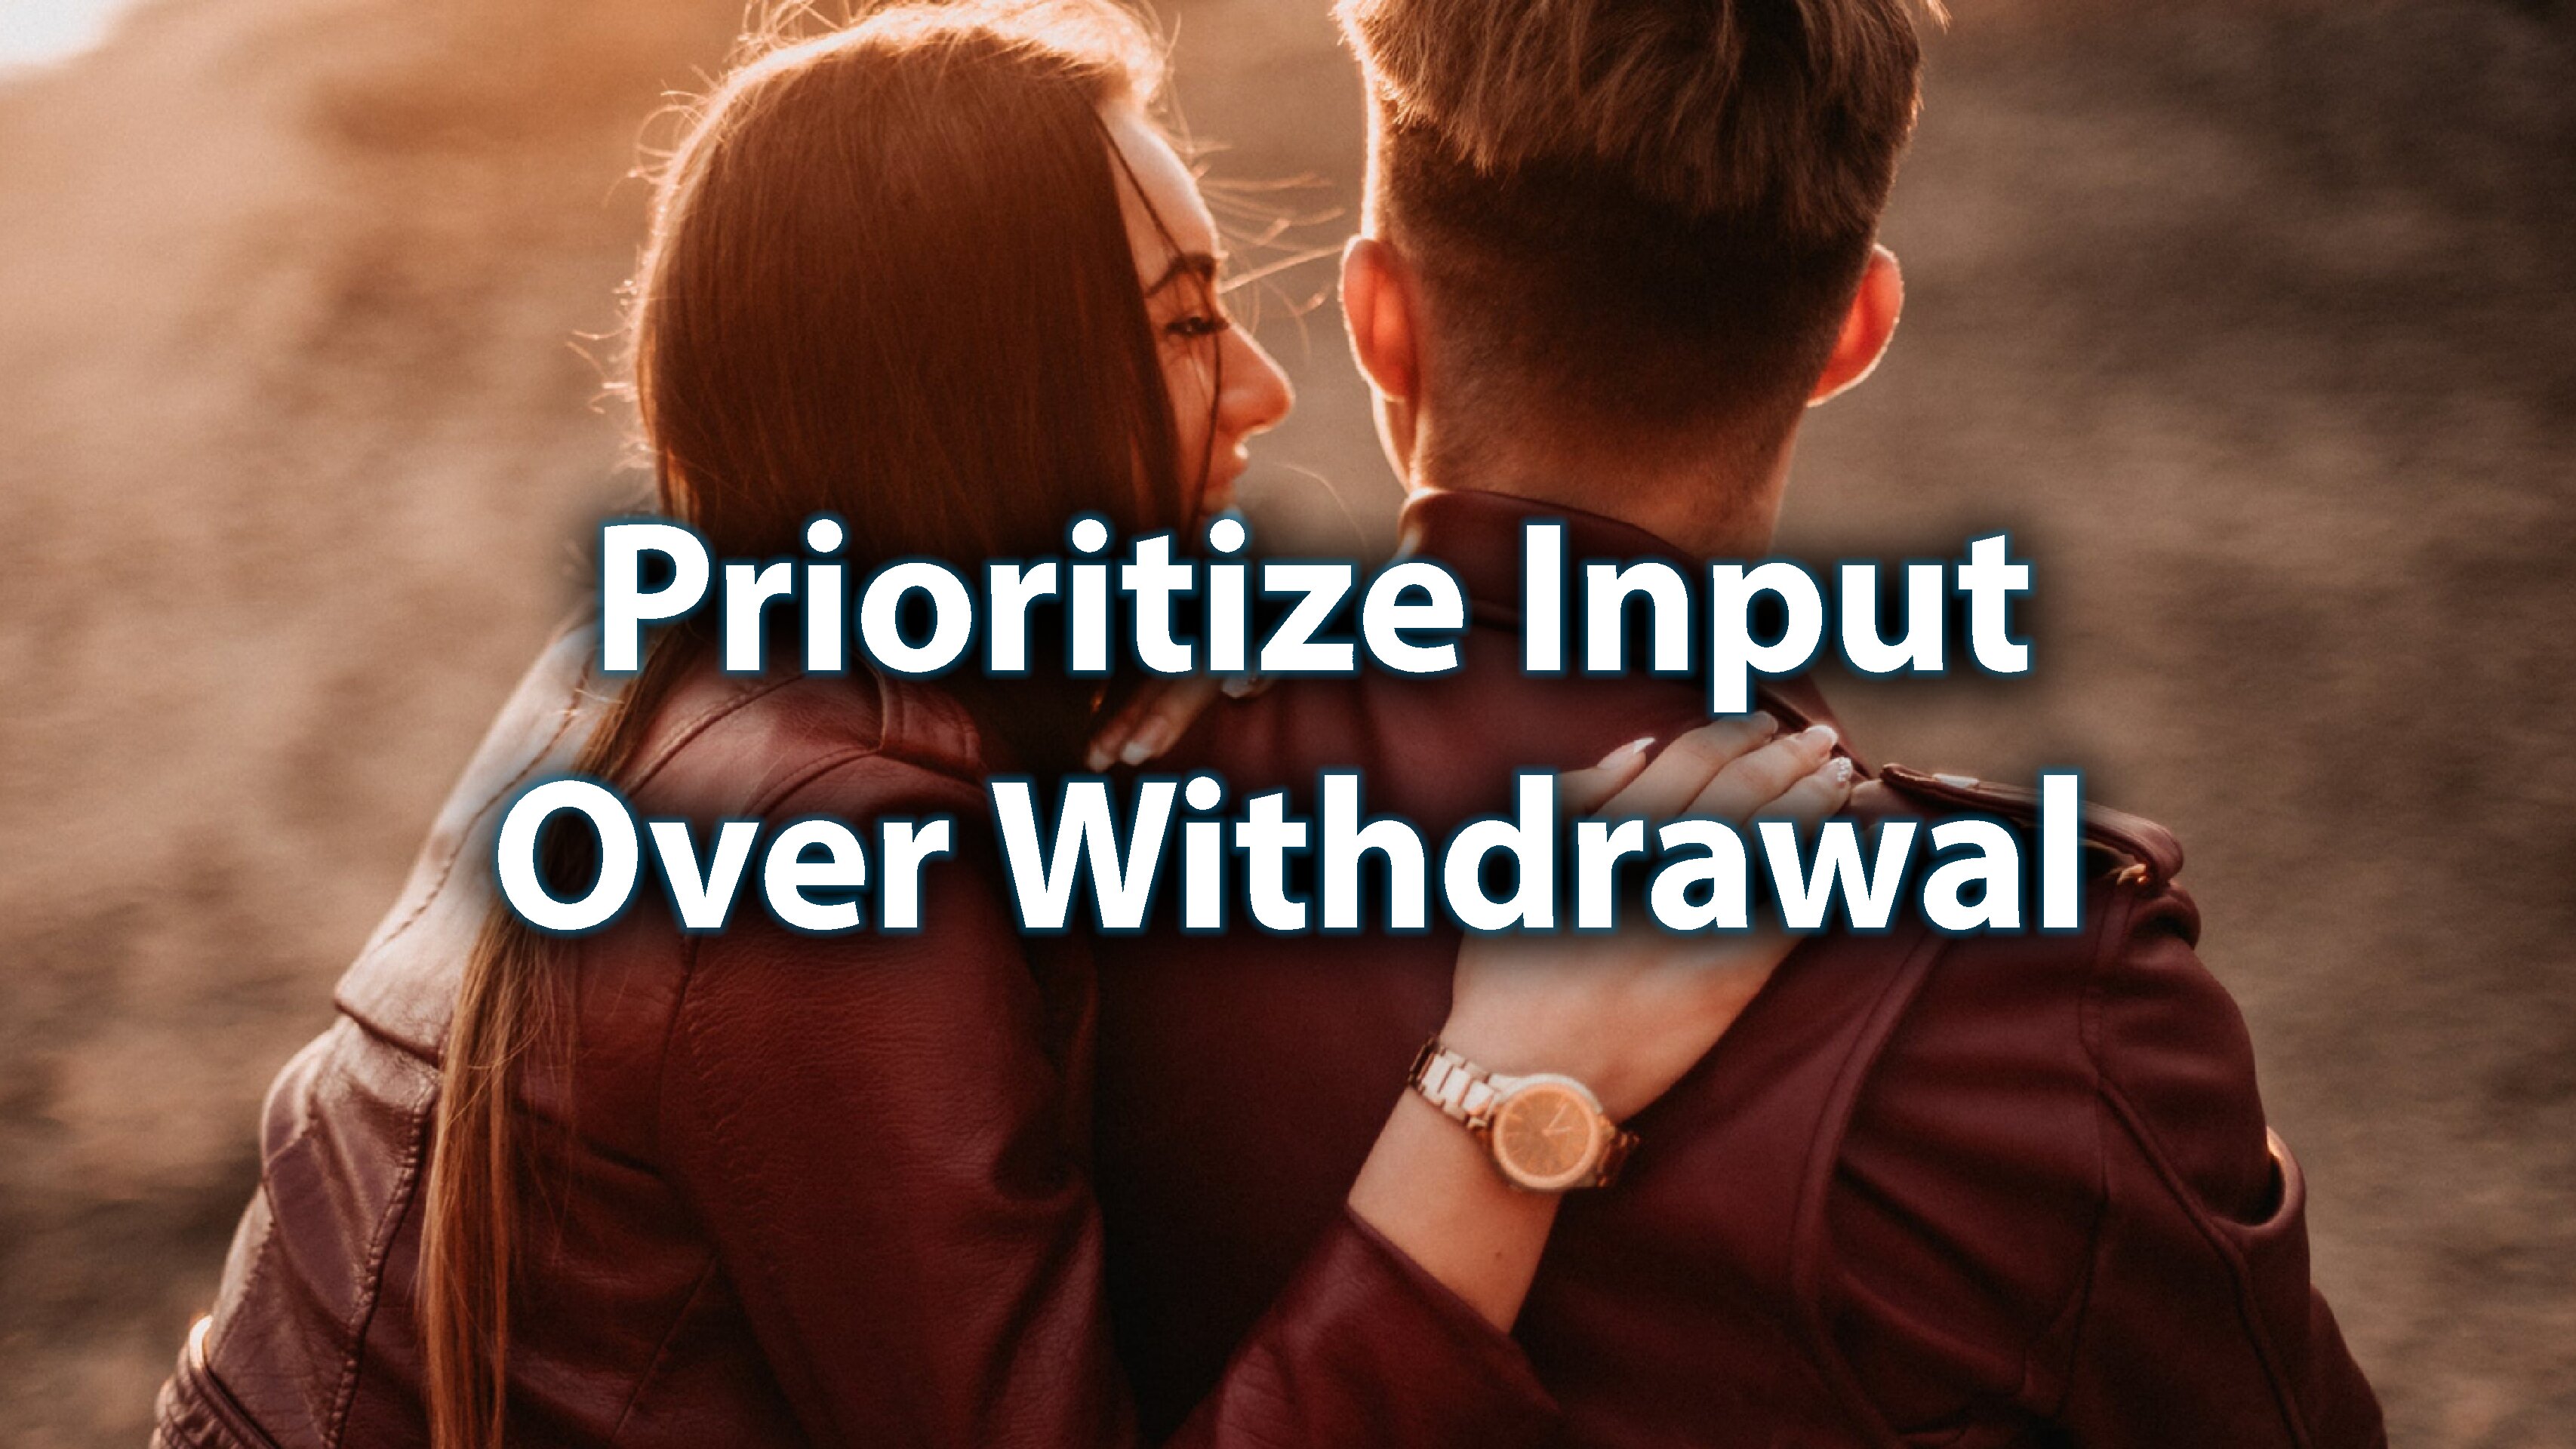 Day 6: Prioritize Input Over Withdrawal